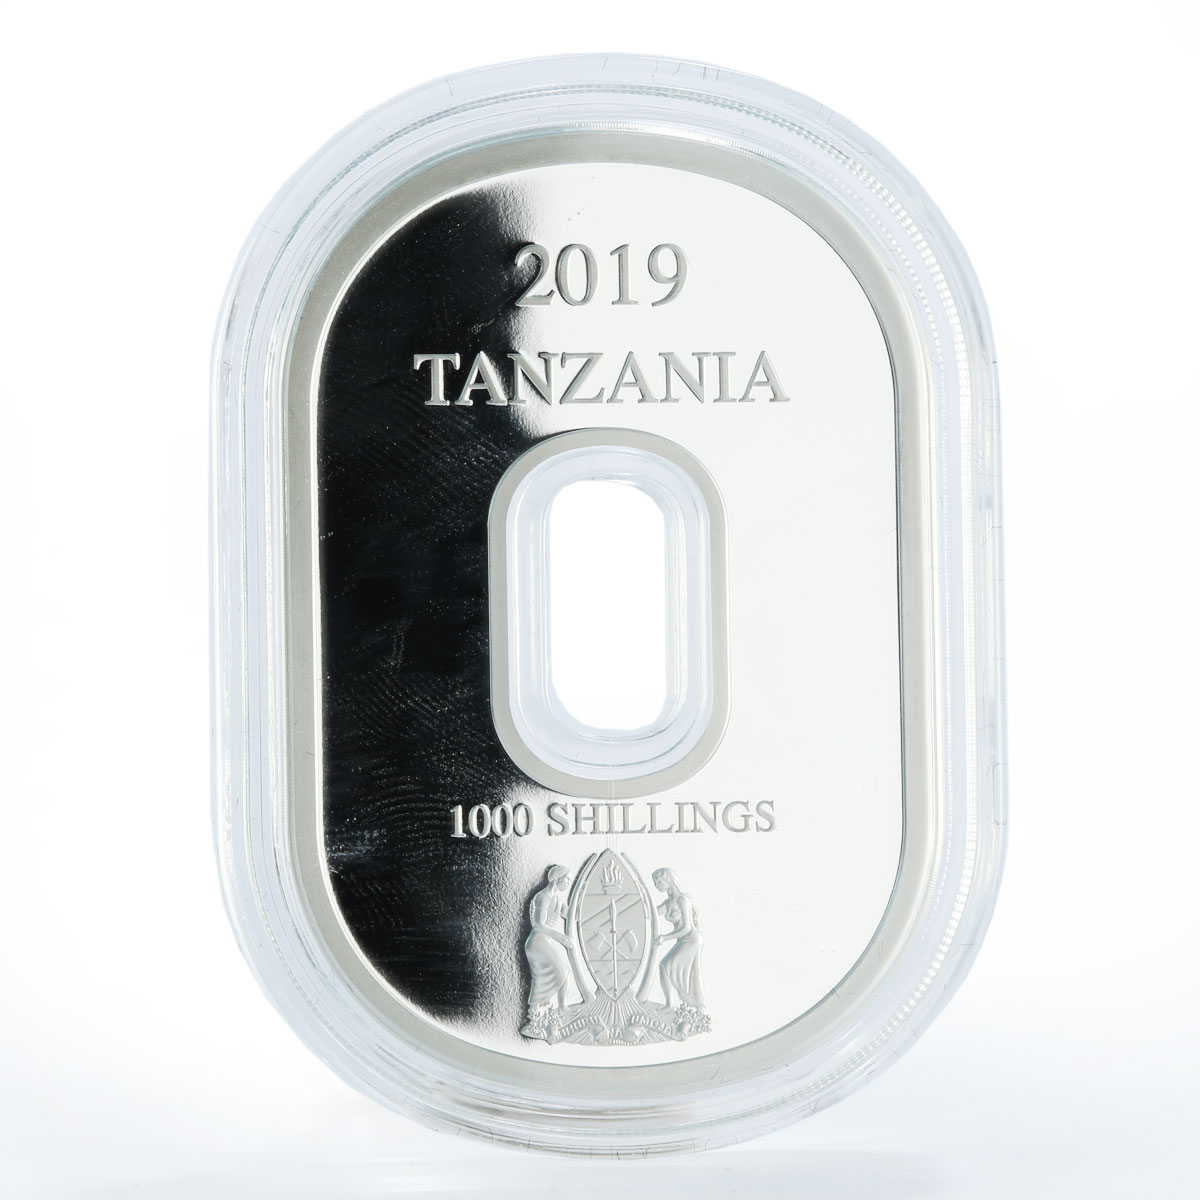 Tanzania set of 2 coins Evolution of Numbers colored silver coins 2019